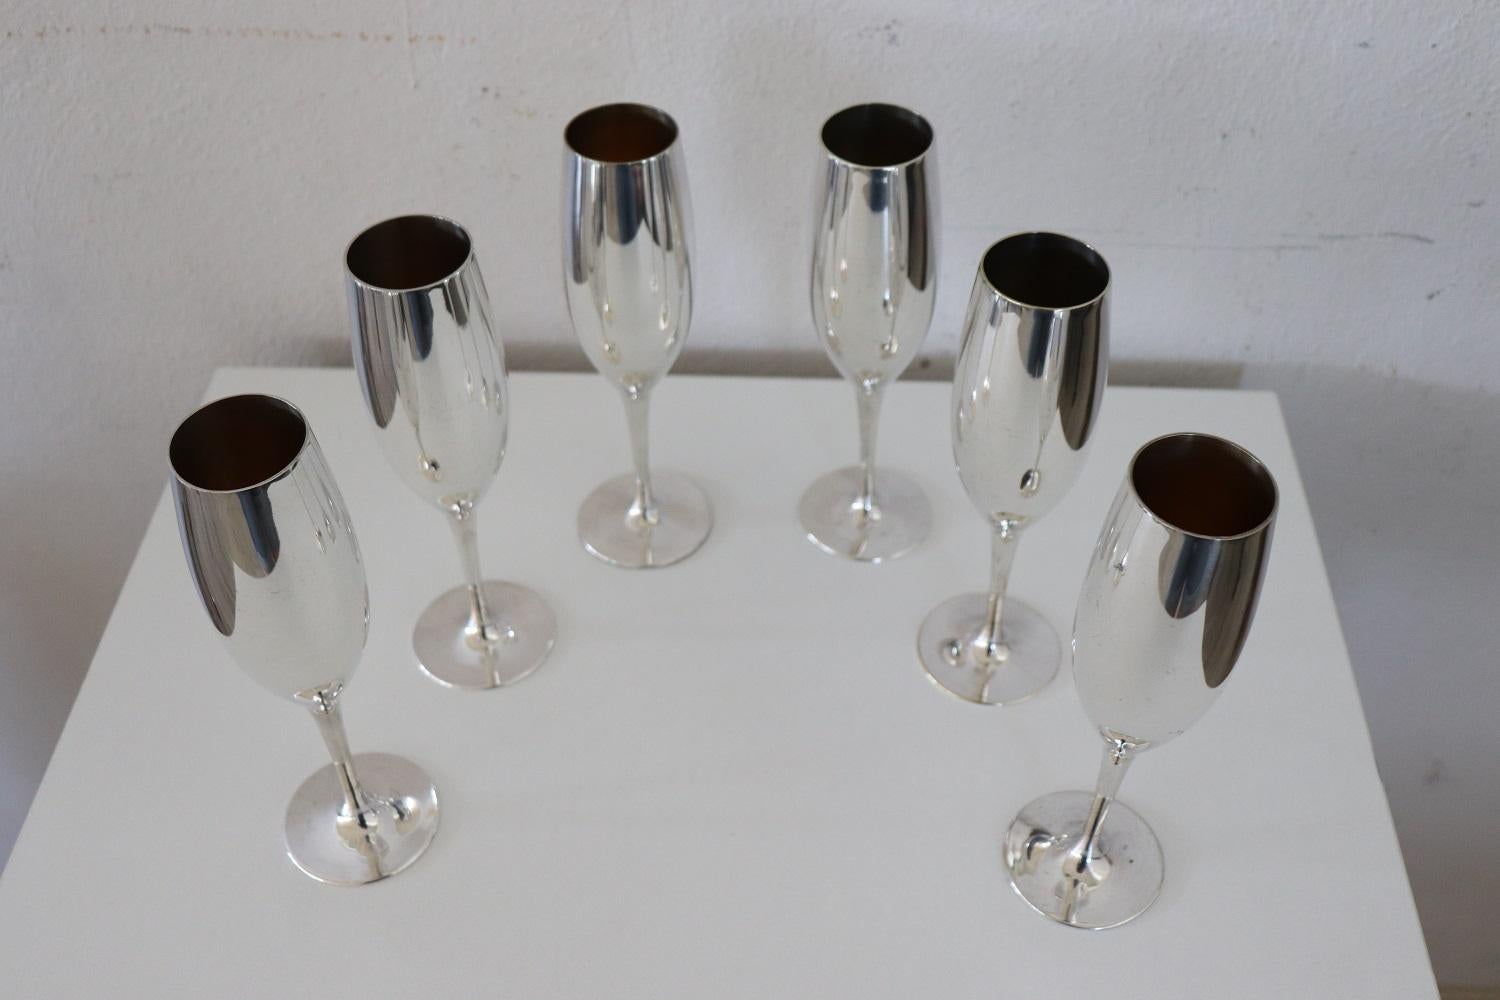 Beautiful set of six flute glasses in silver plated perfect for champagne. No brand present. Used but in good condition.